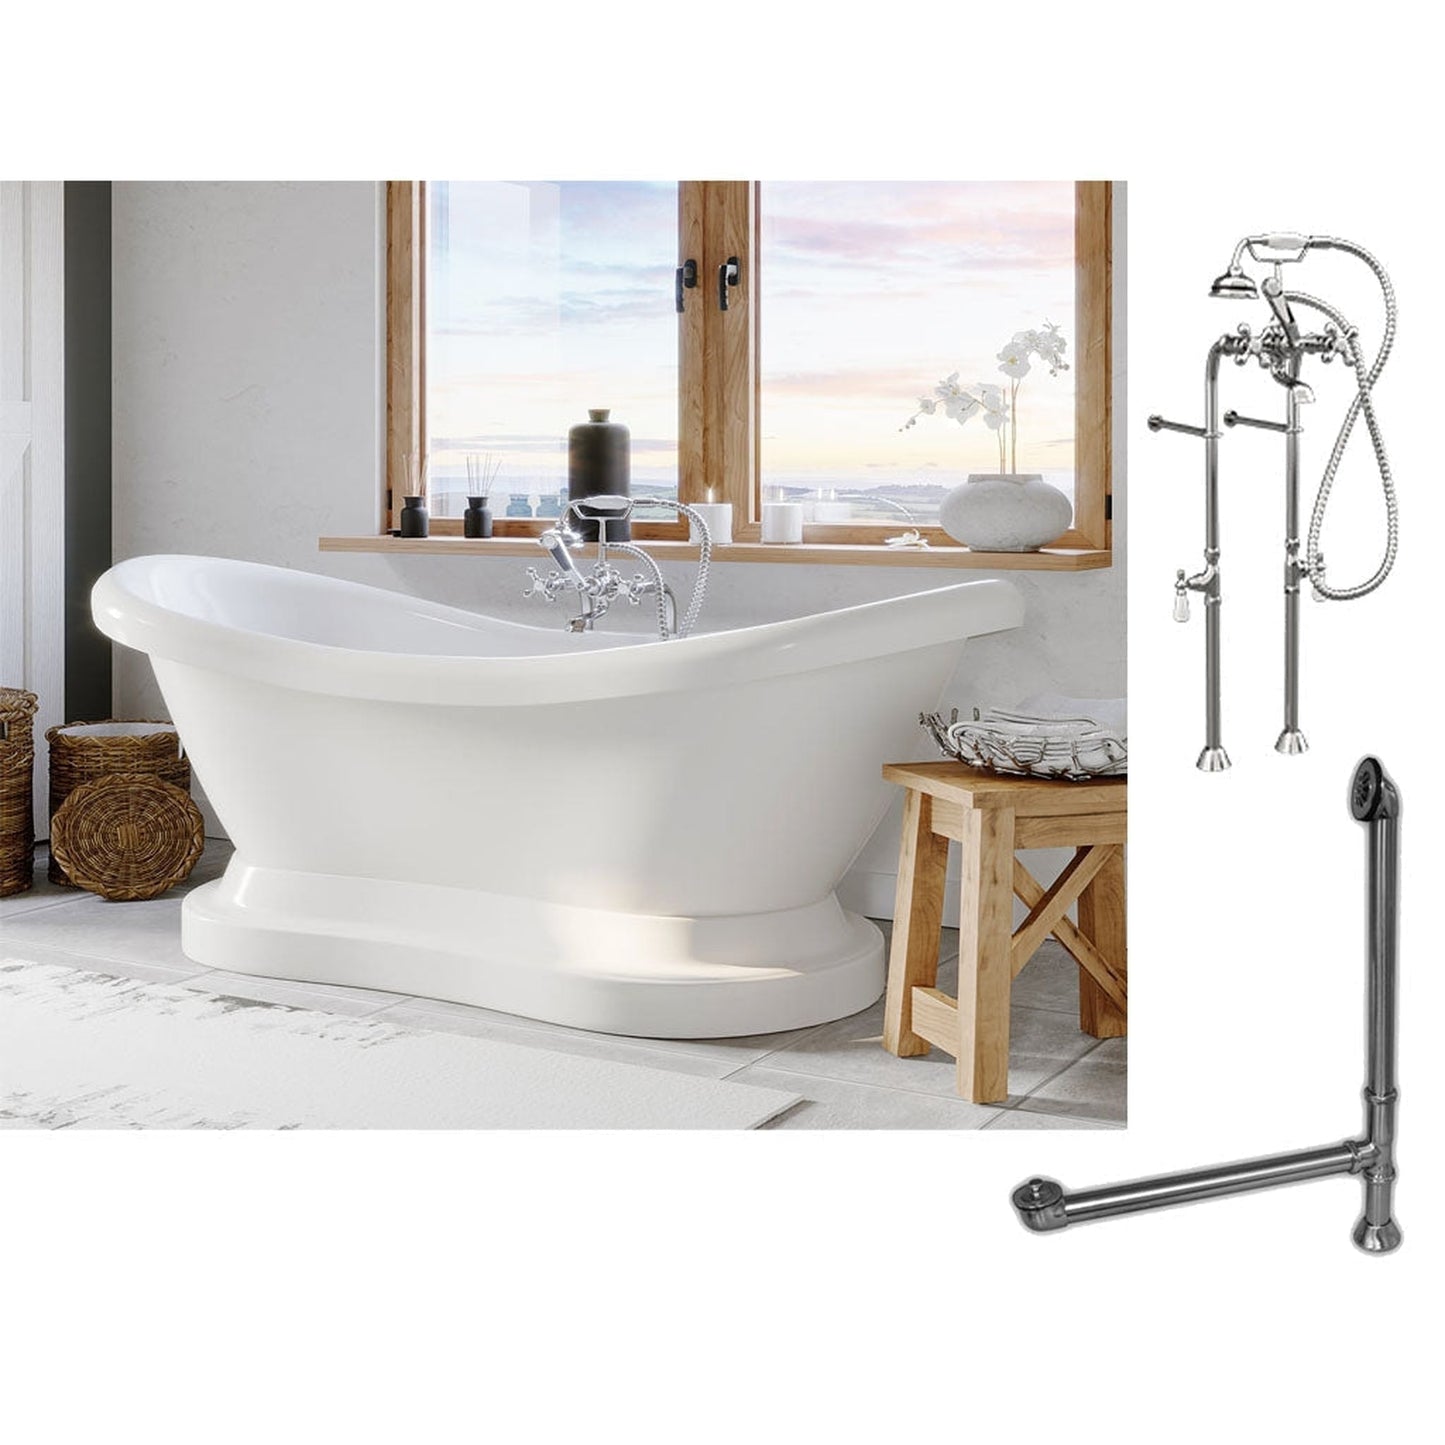 Cambridge Plumbing 69" White Double Slipper Pedestal Acrylic Bathtub With No Deck Holes And Complete Plumbing Package Including Floor Mounted British Telephone Faucet, Drain And Overflow Assembly In Brushed Nickel